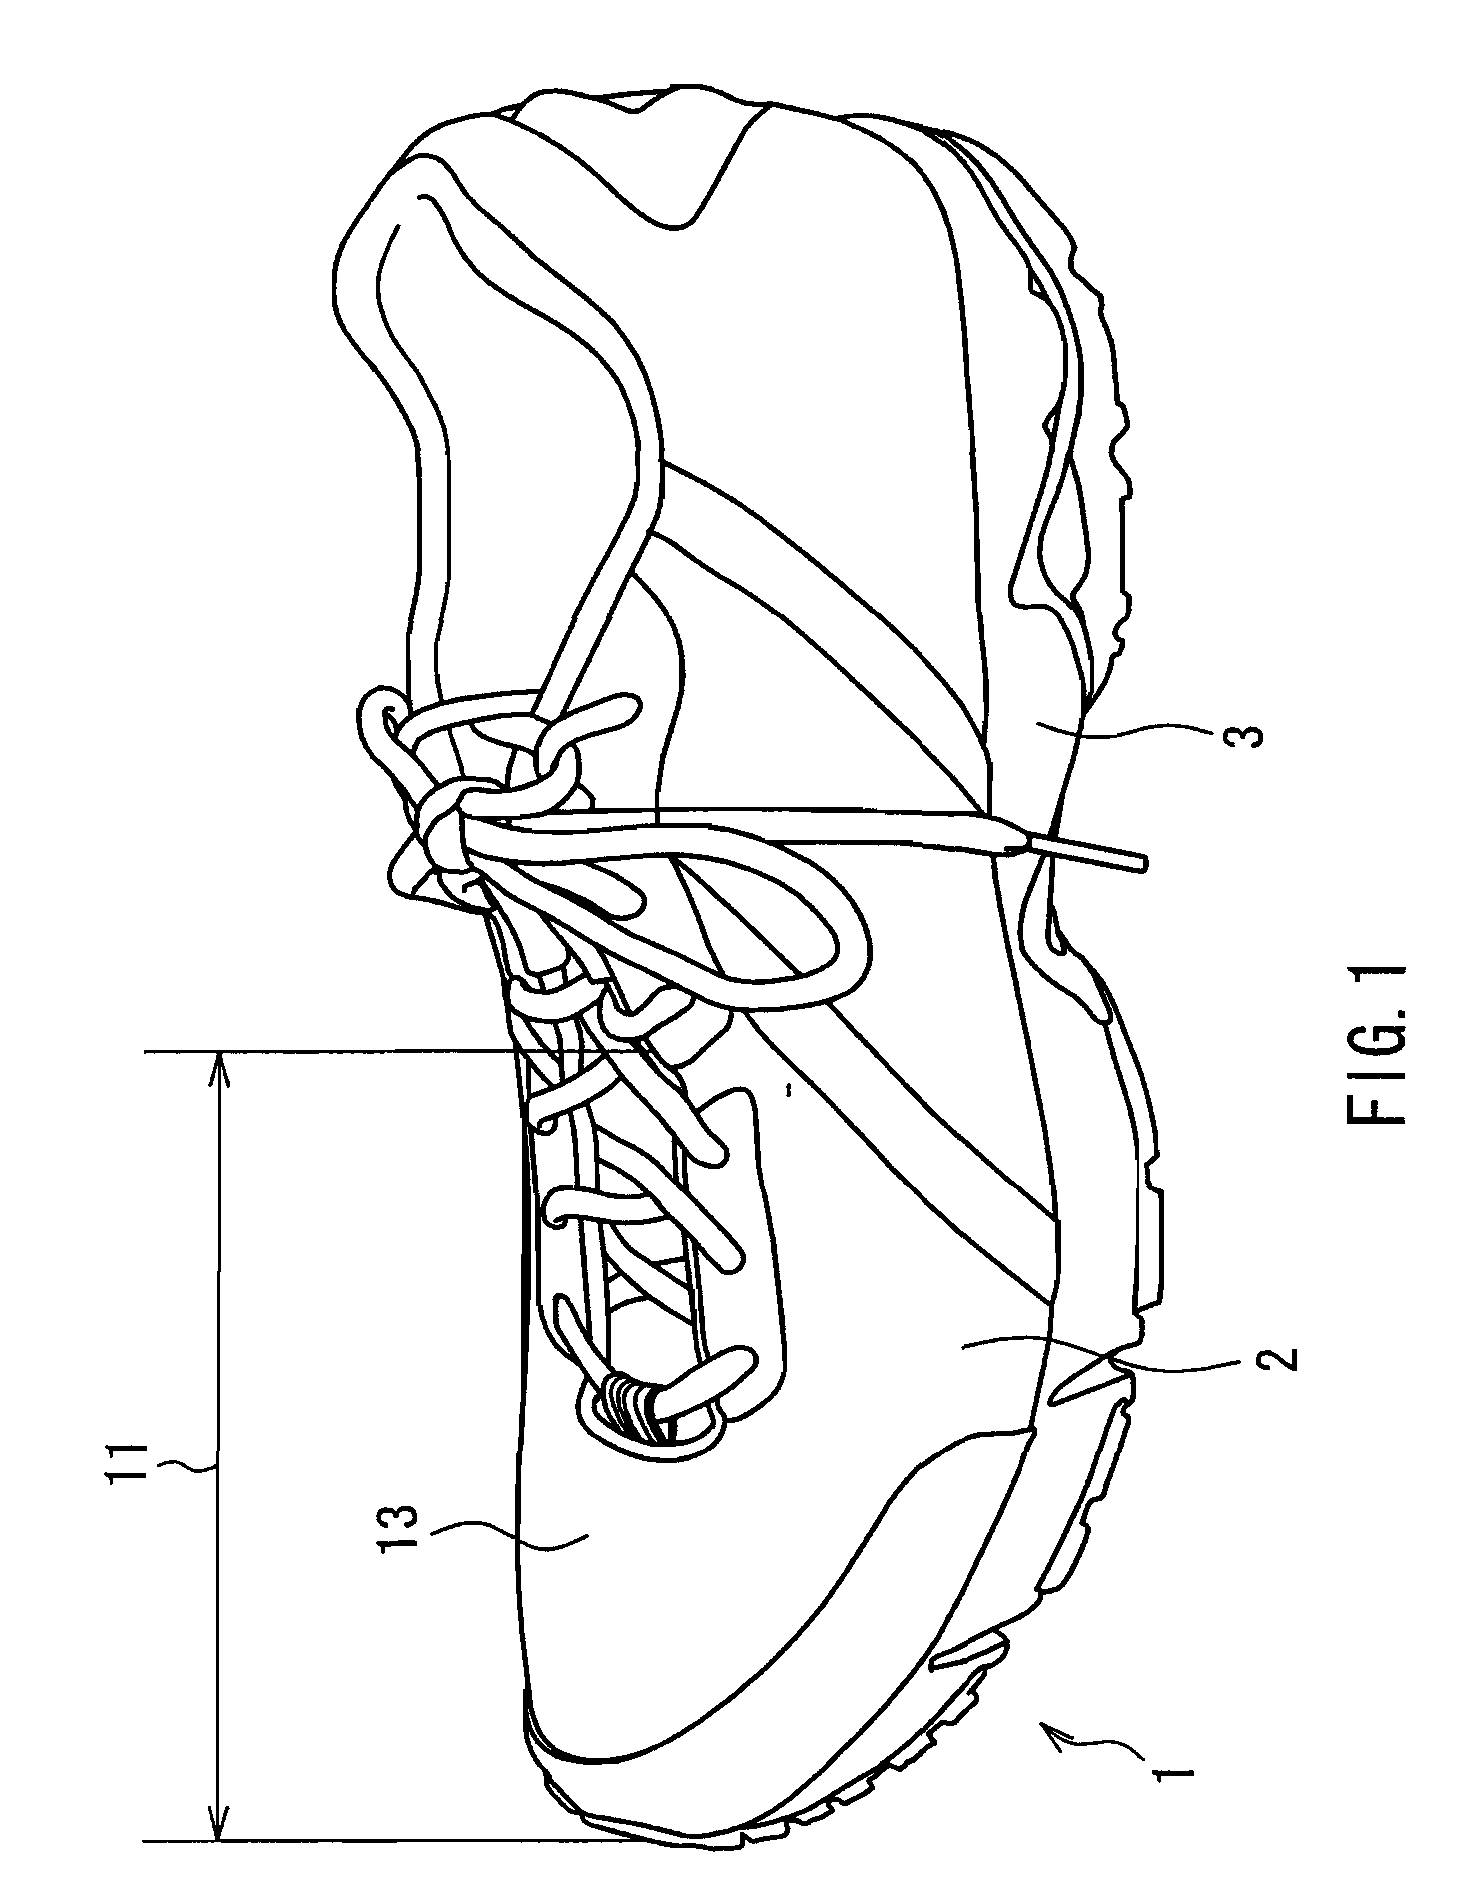 Shoe and method of manufacturing the same